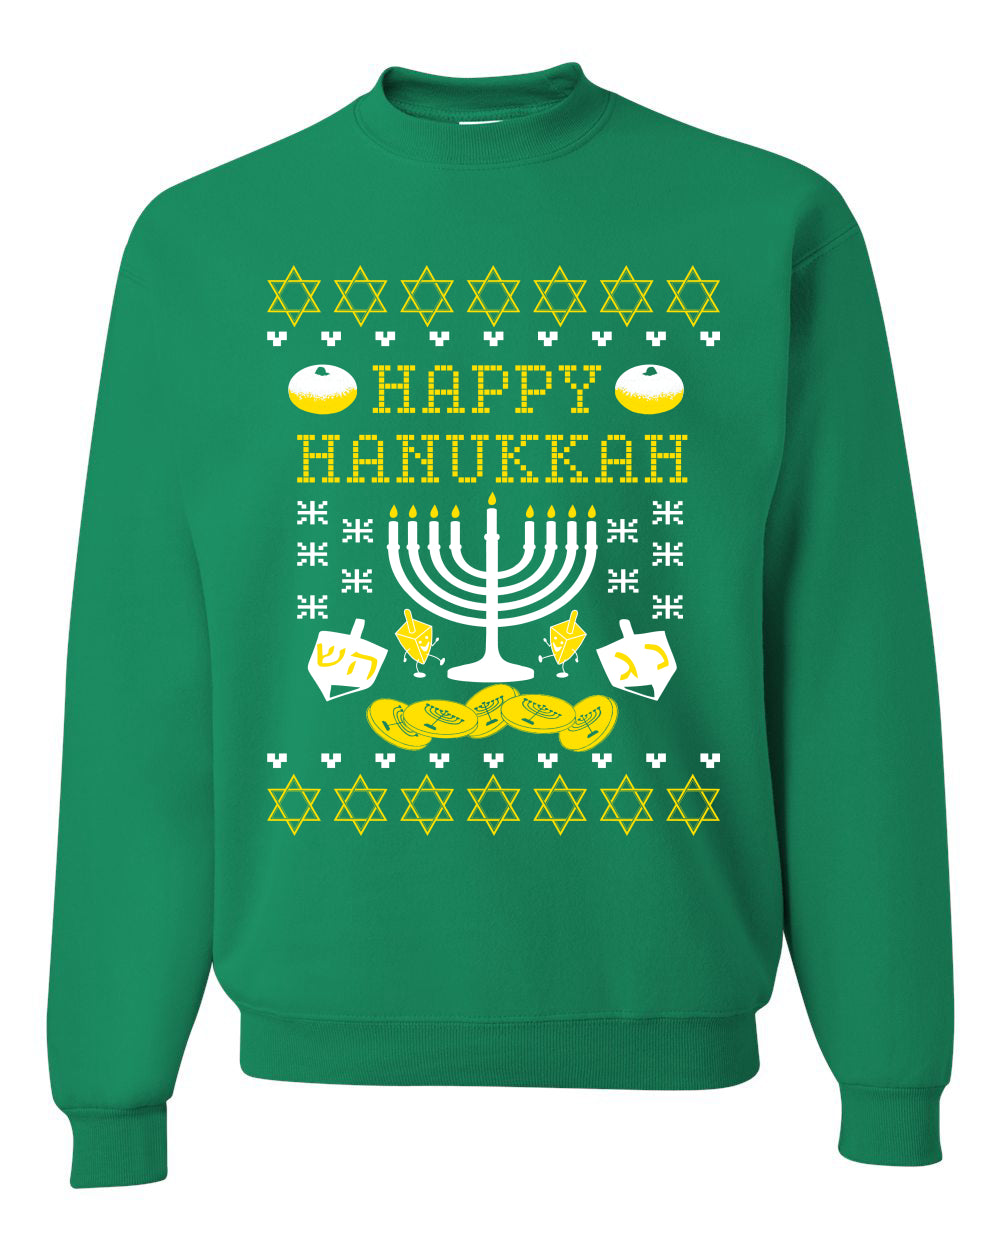 Happy Hannukah Menorah Candle Channukah Merry Ugly Christmas Sweater Unisex Crewneck Graphic Sweatshirt